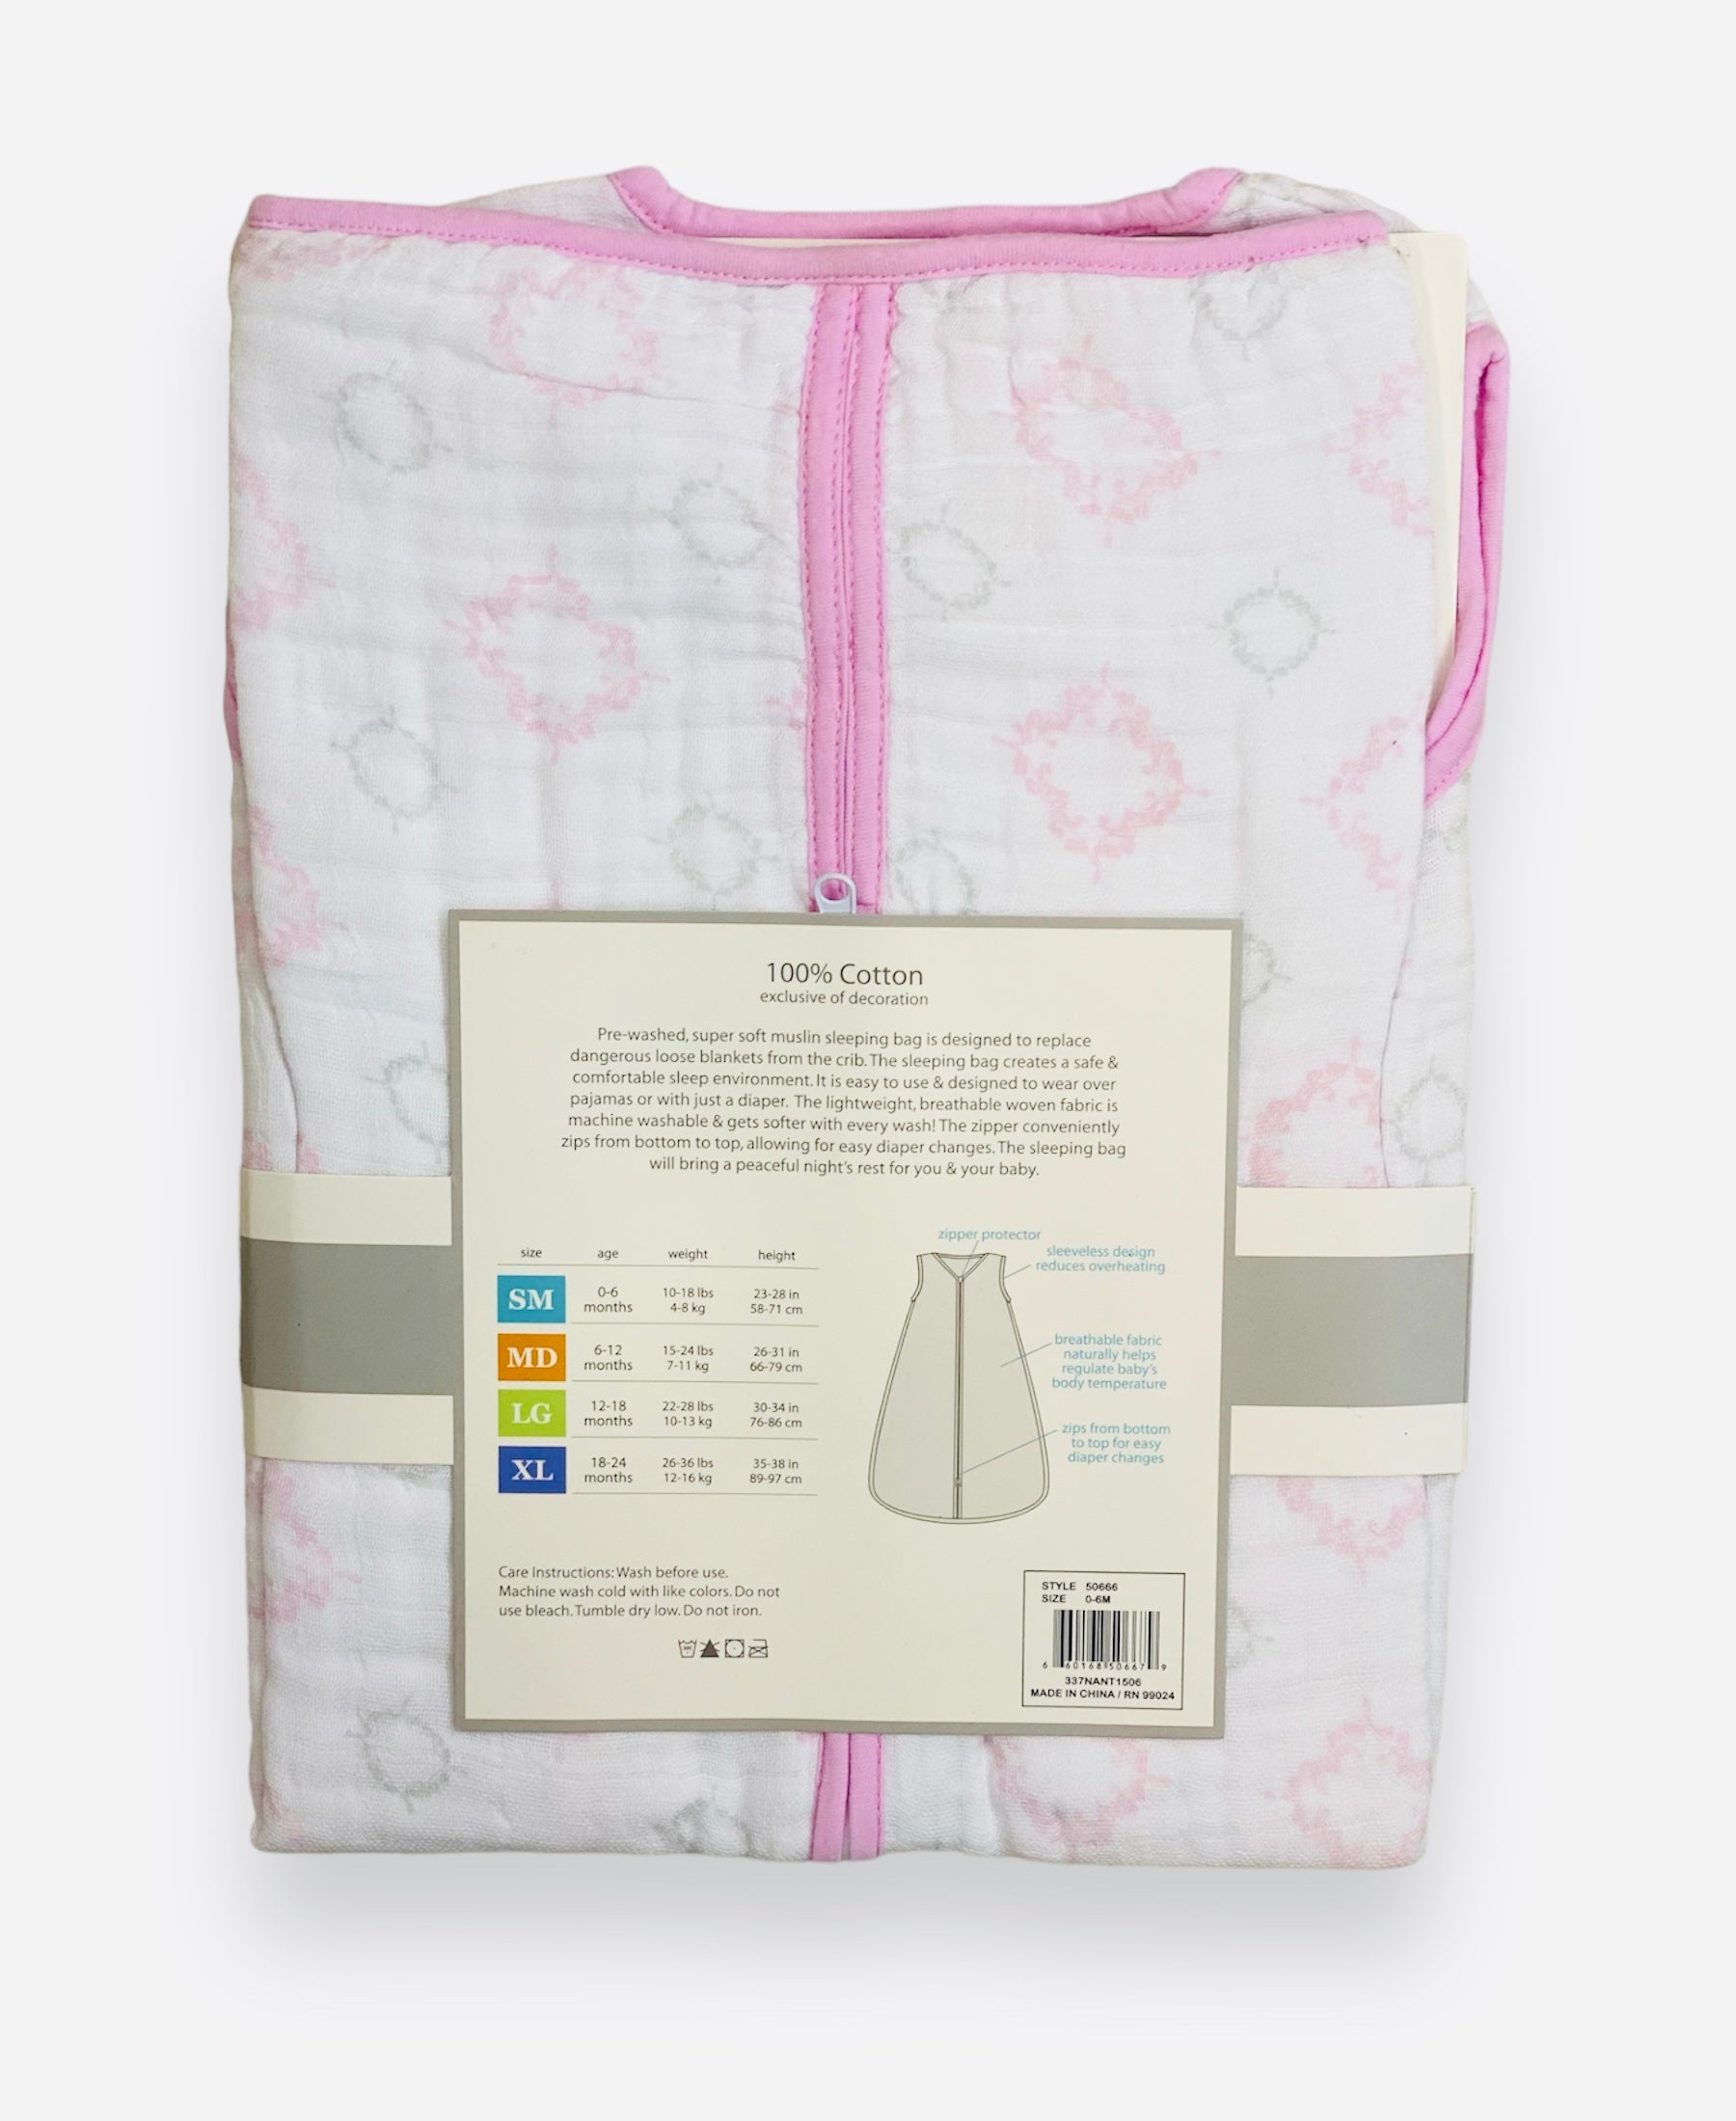 Hudson Baby Swaddle Sheet with Zipper